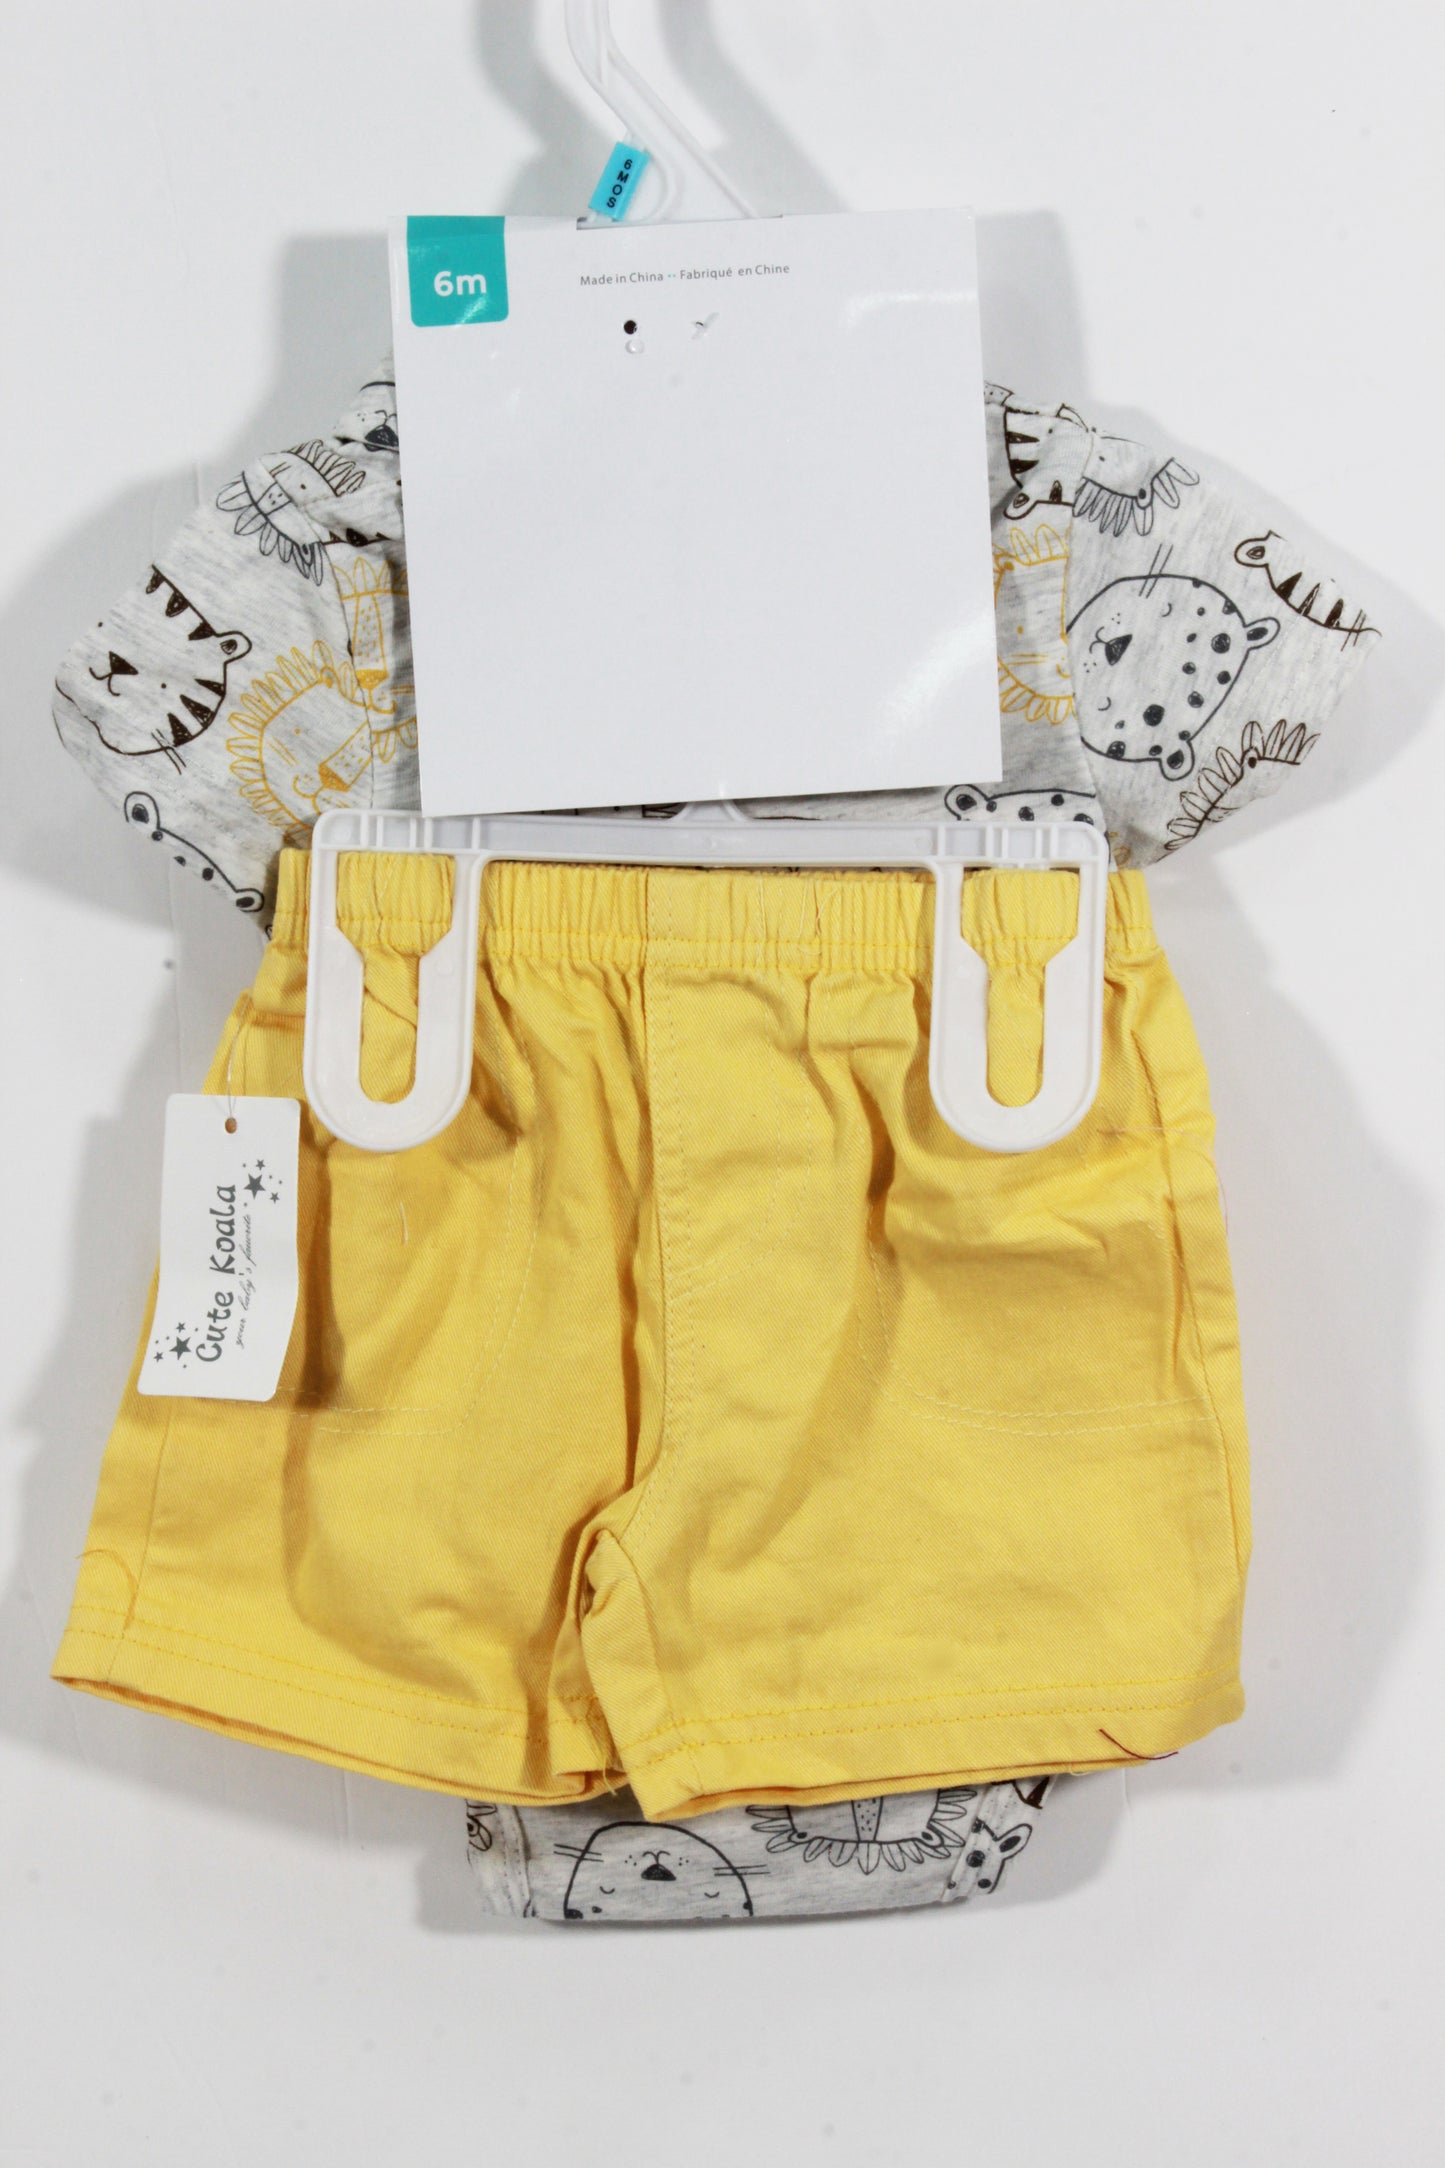 BABY OUTFIT 5688